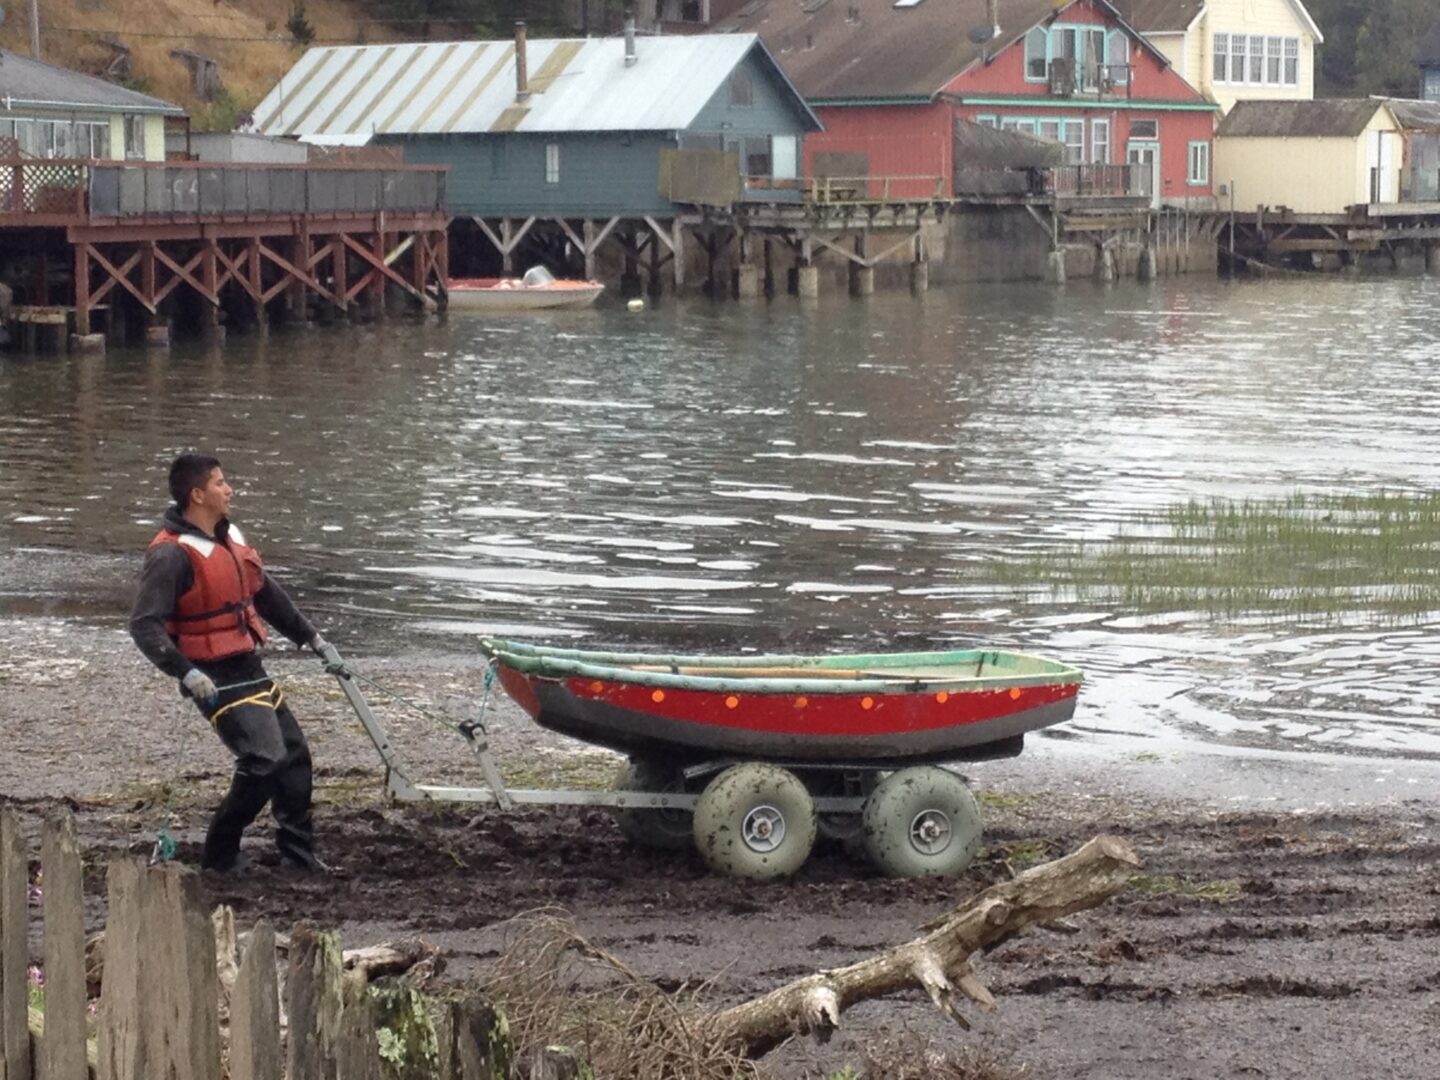 A man pushing a boat in the mud.